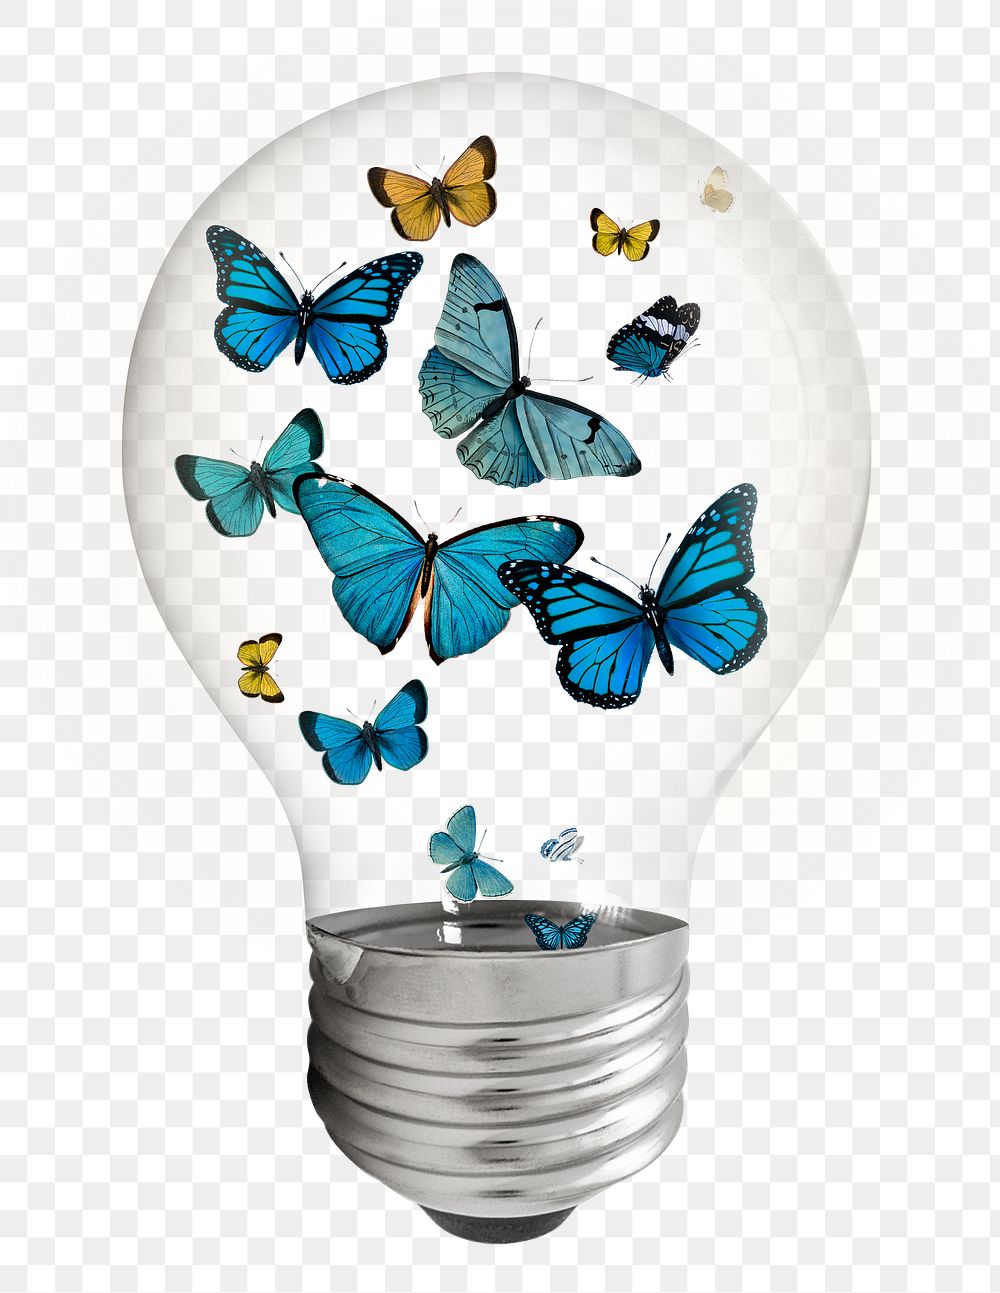 Butterflies bulb png sticker, insect, aesthetic design on transparent background